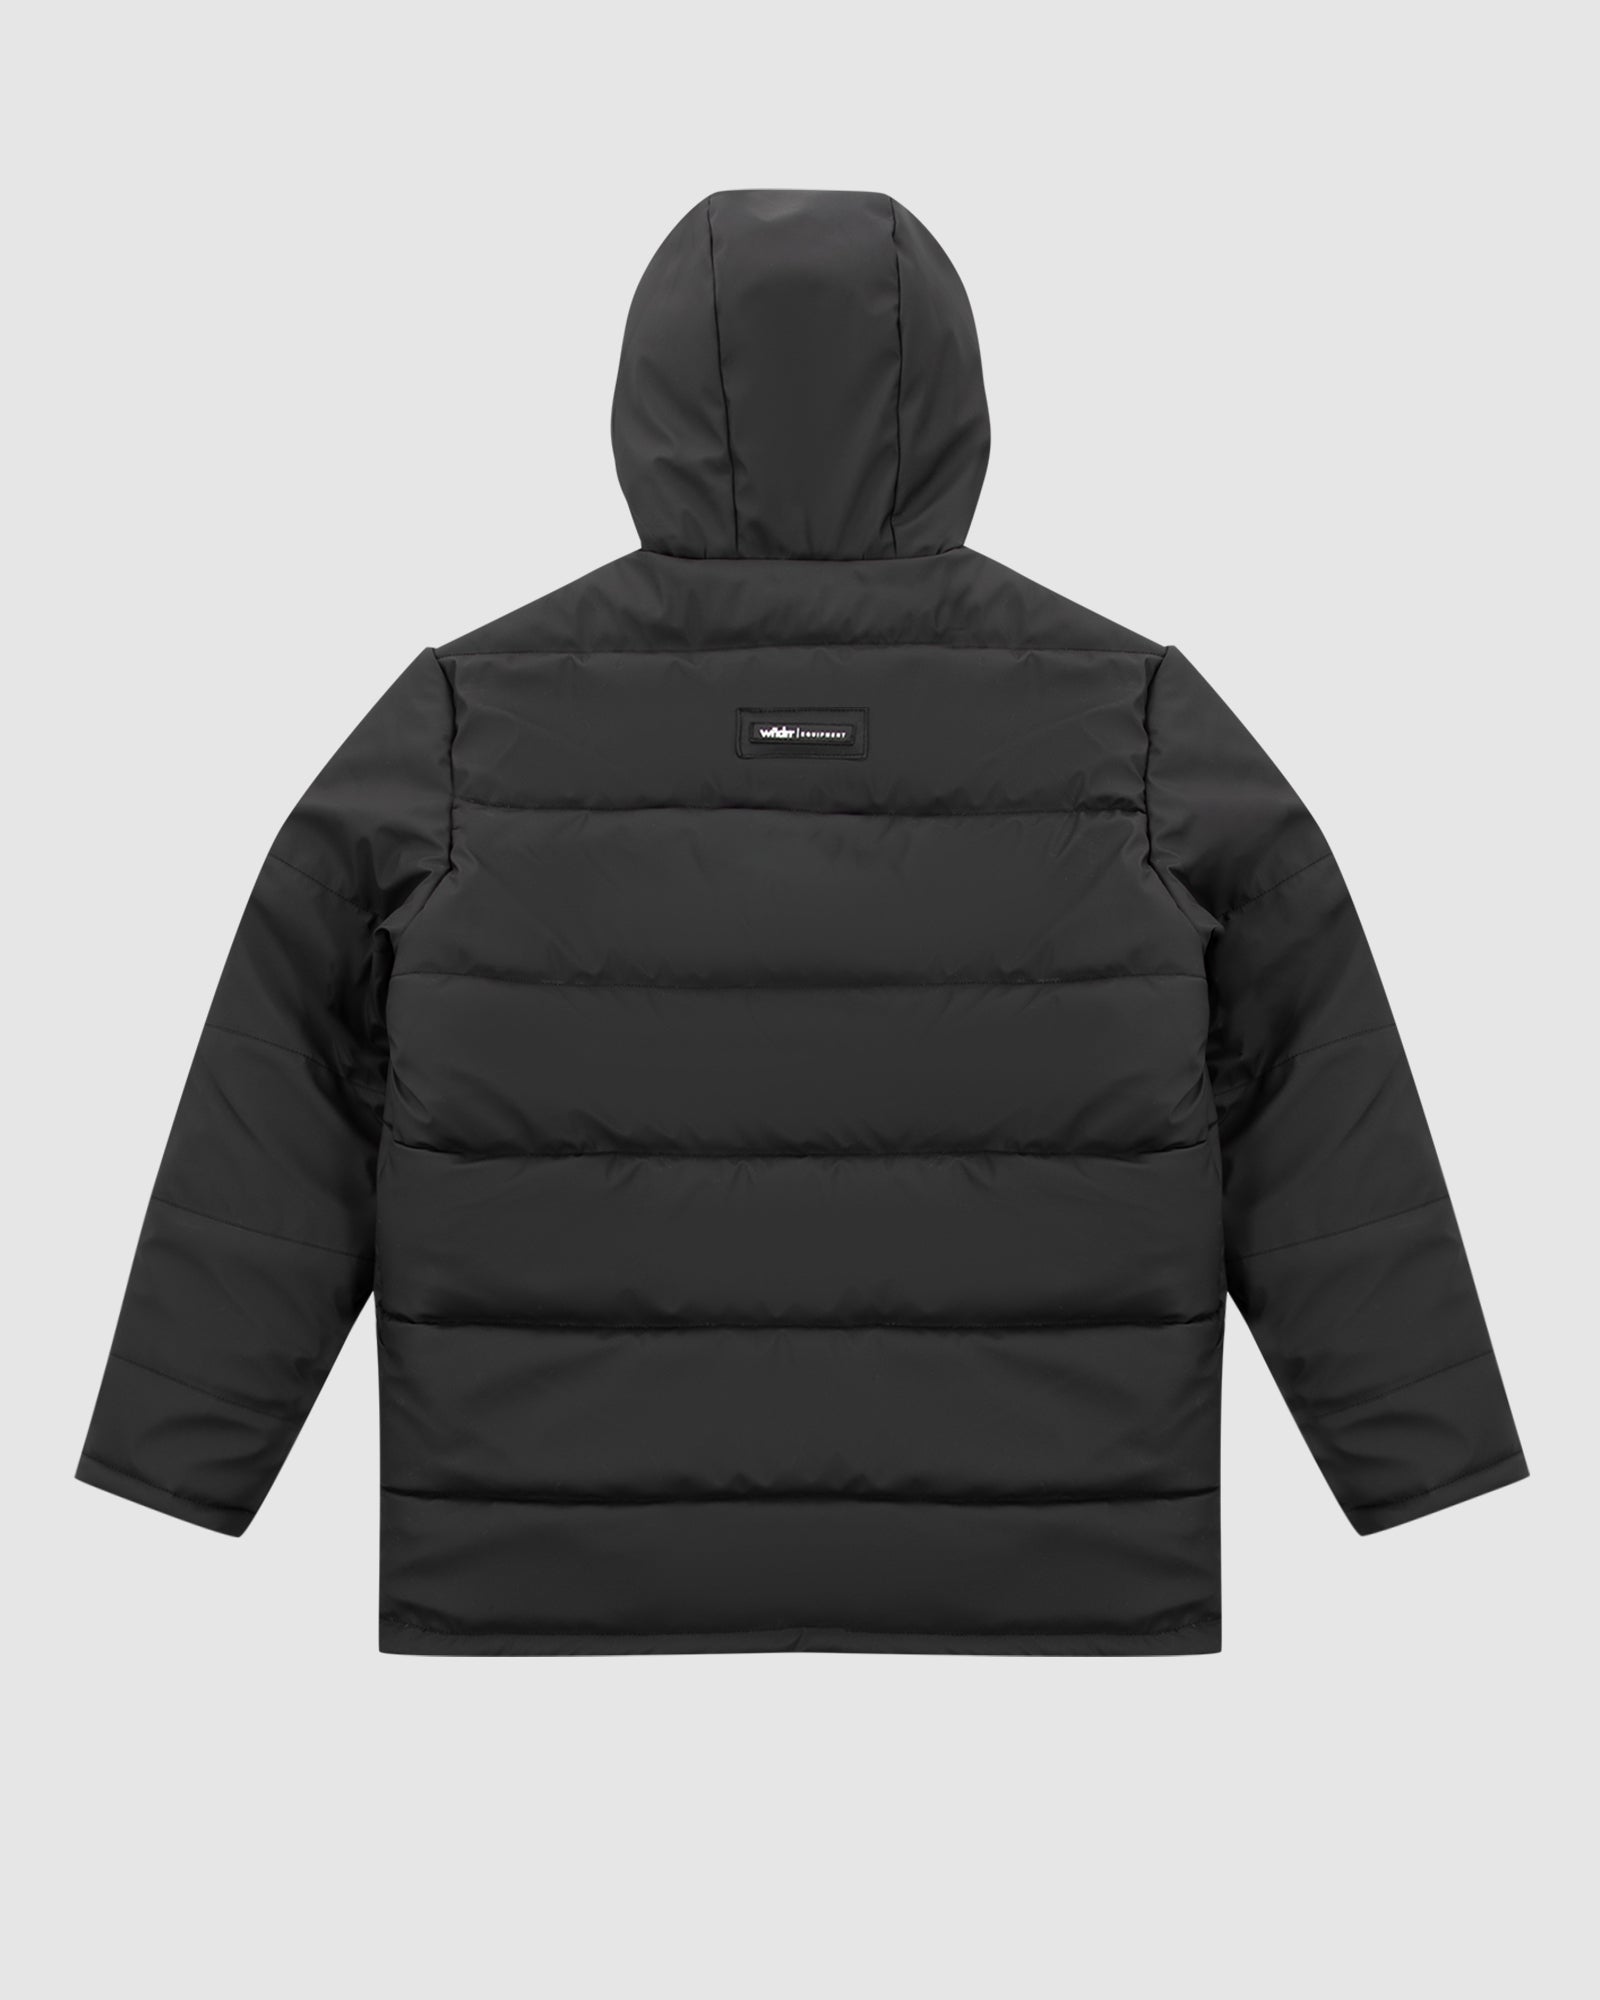 COUNT IT PUFFER JACKET - BLACK